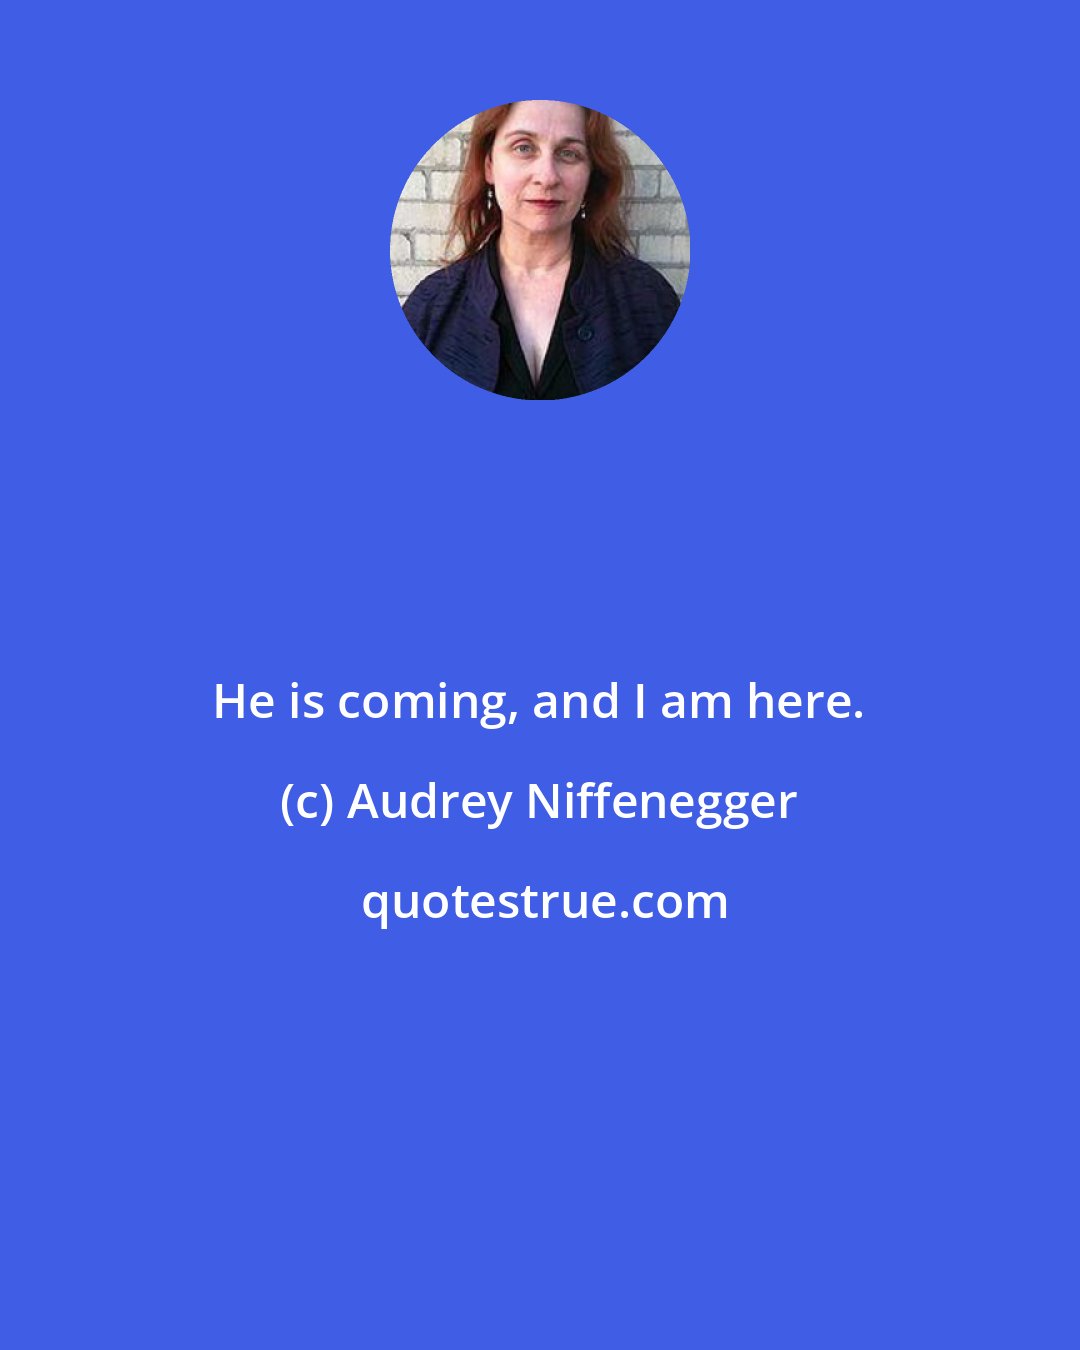 Audrey Niffenegger: He is coming, and I am here.